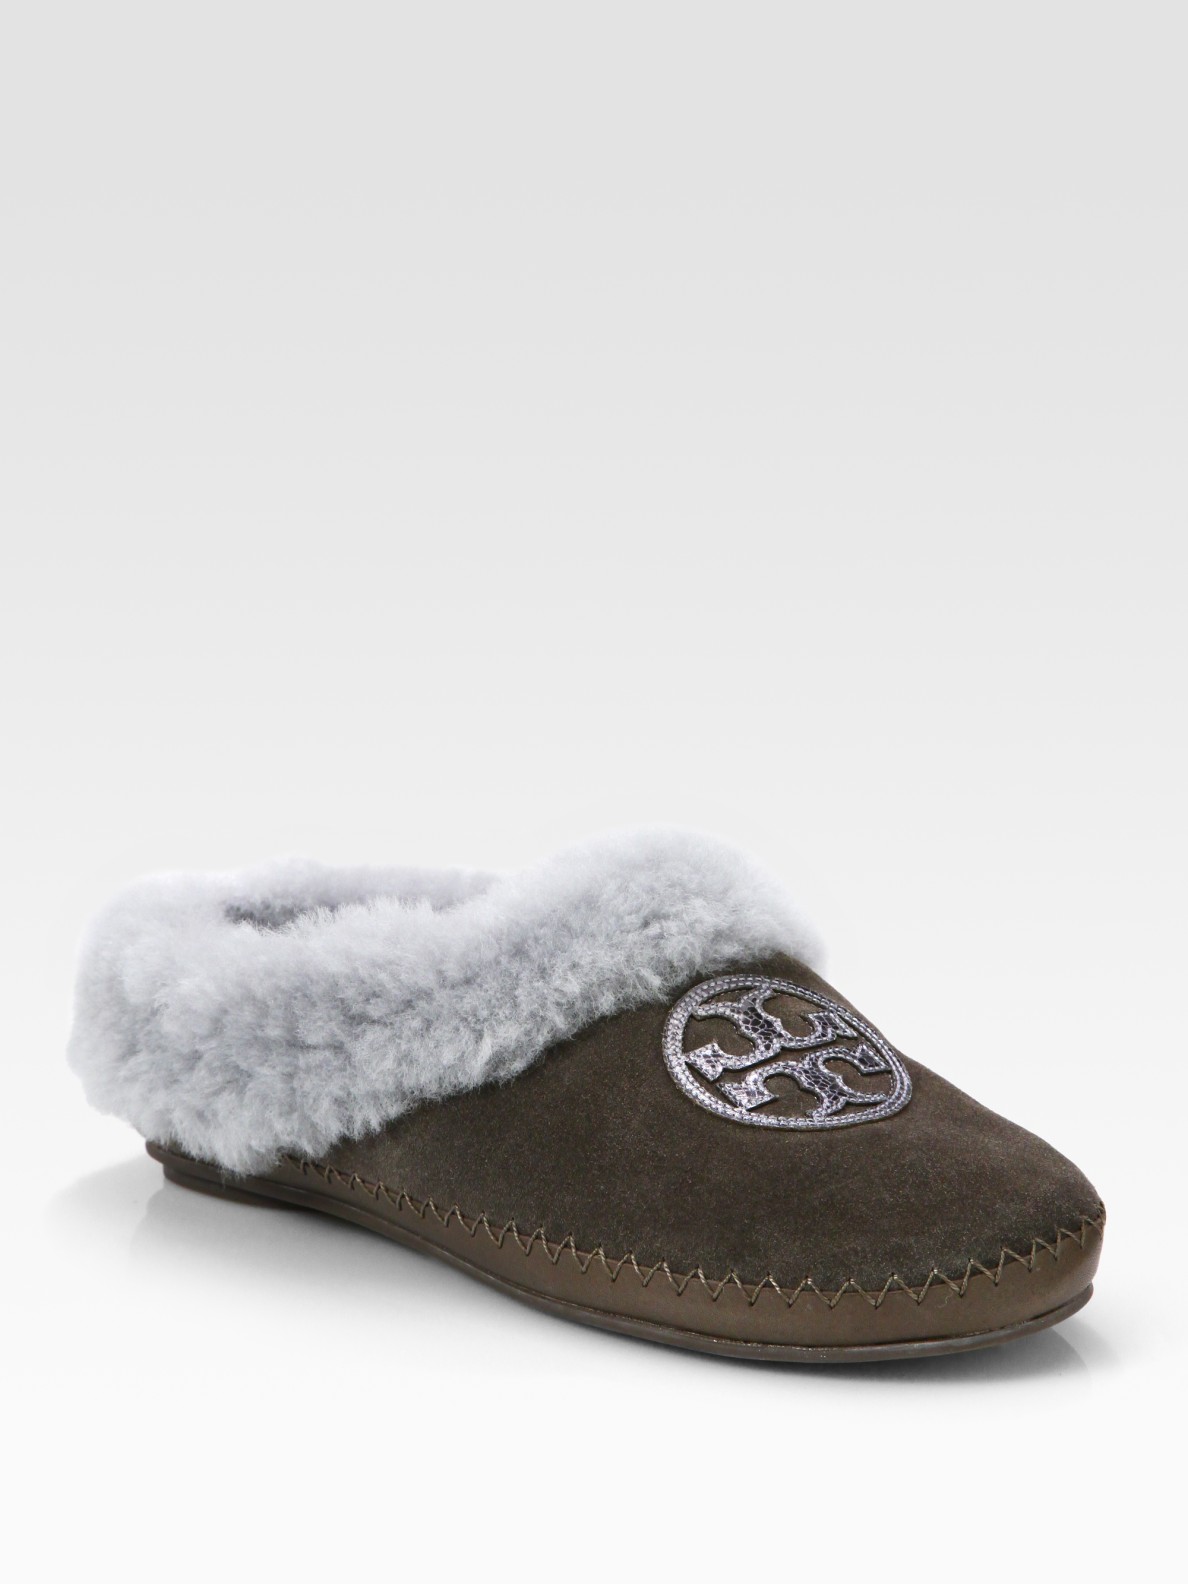 Tory Burch Coley Suede and Shearling Slippers in Brown (grey) | Lyst